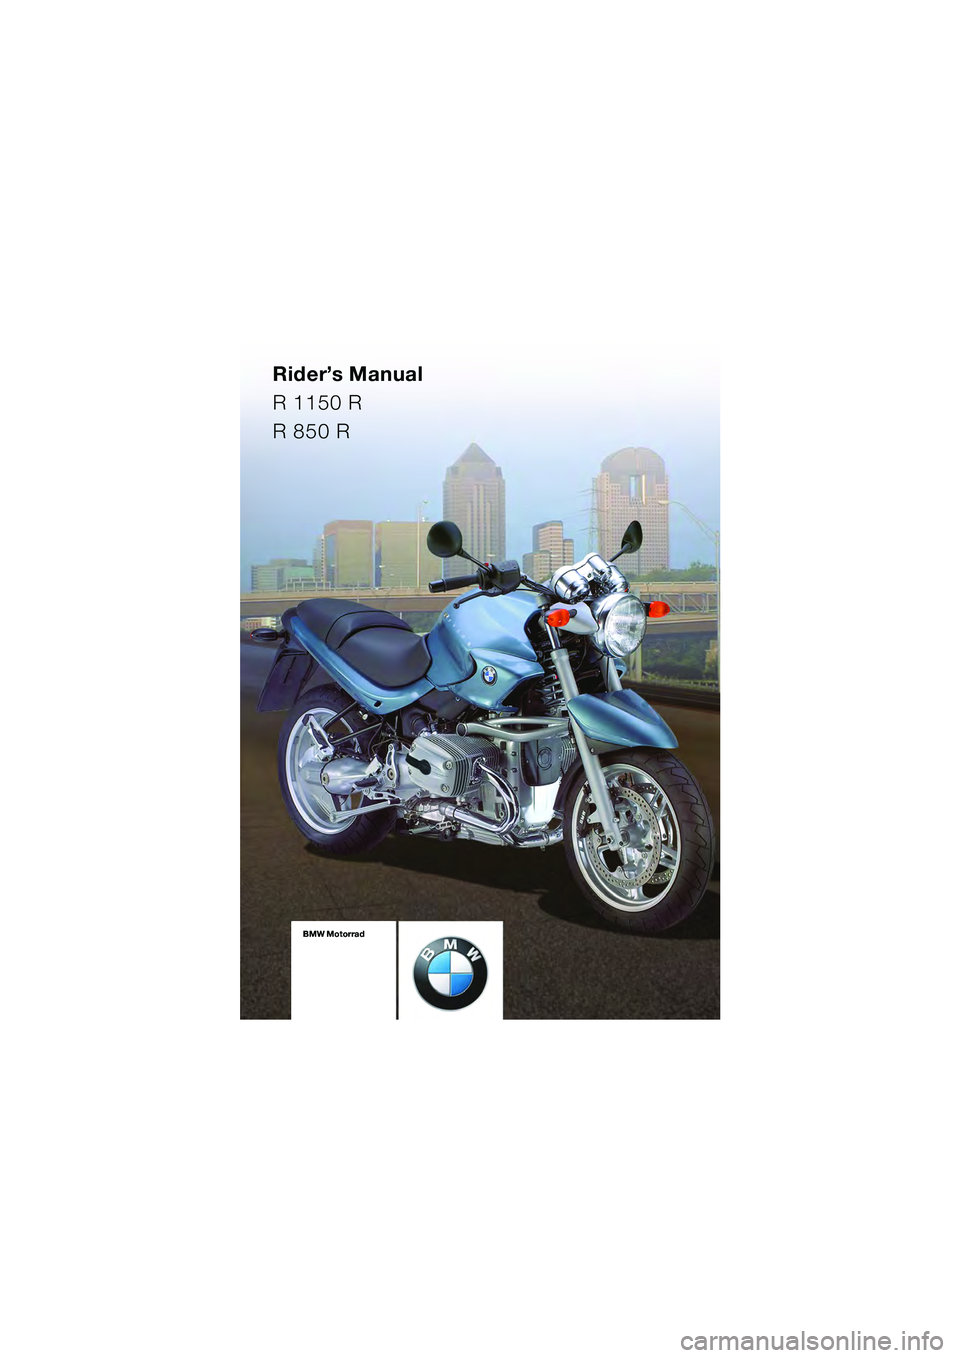 BMW MOTORRAD R 1150 R 2004  Riders Manual (in English) Rider’s Manual
R 1150 R
R 850 R
BMW Motorrad
On-board  
documentation
consisting of  
Riders Manual  
and Maintenance  
InstructionsBMW Motorrad
On-board  
documentation
consisting of  
Riders Man